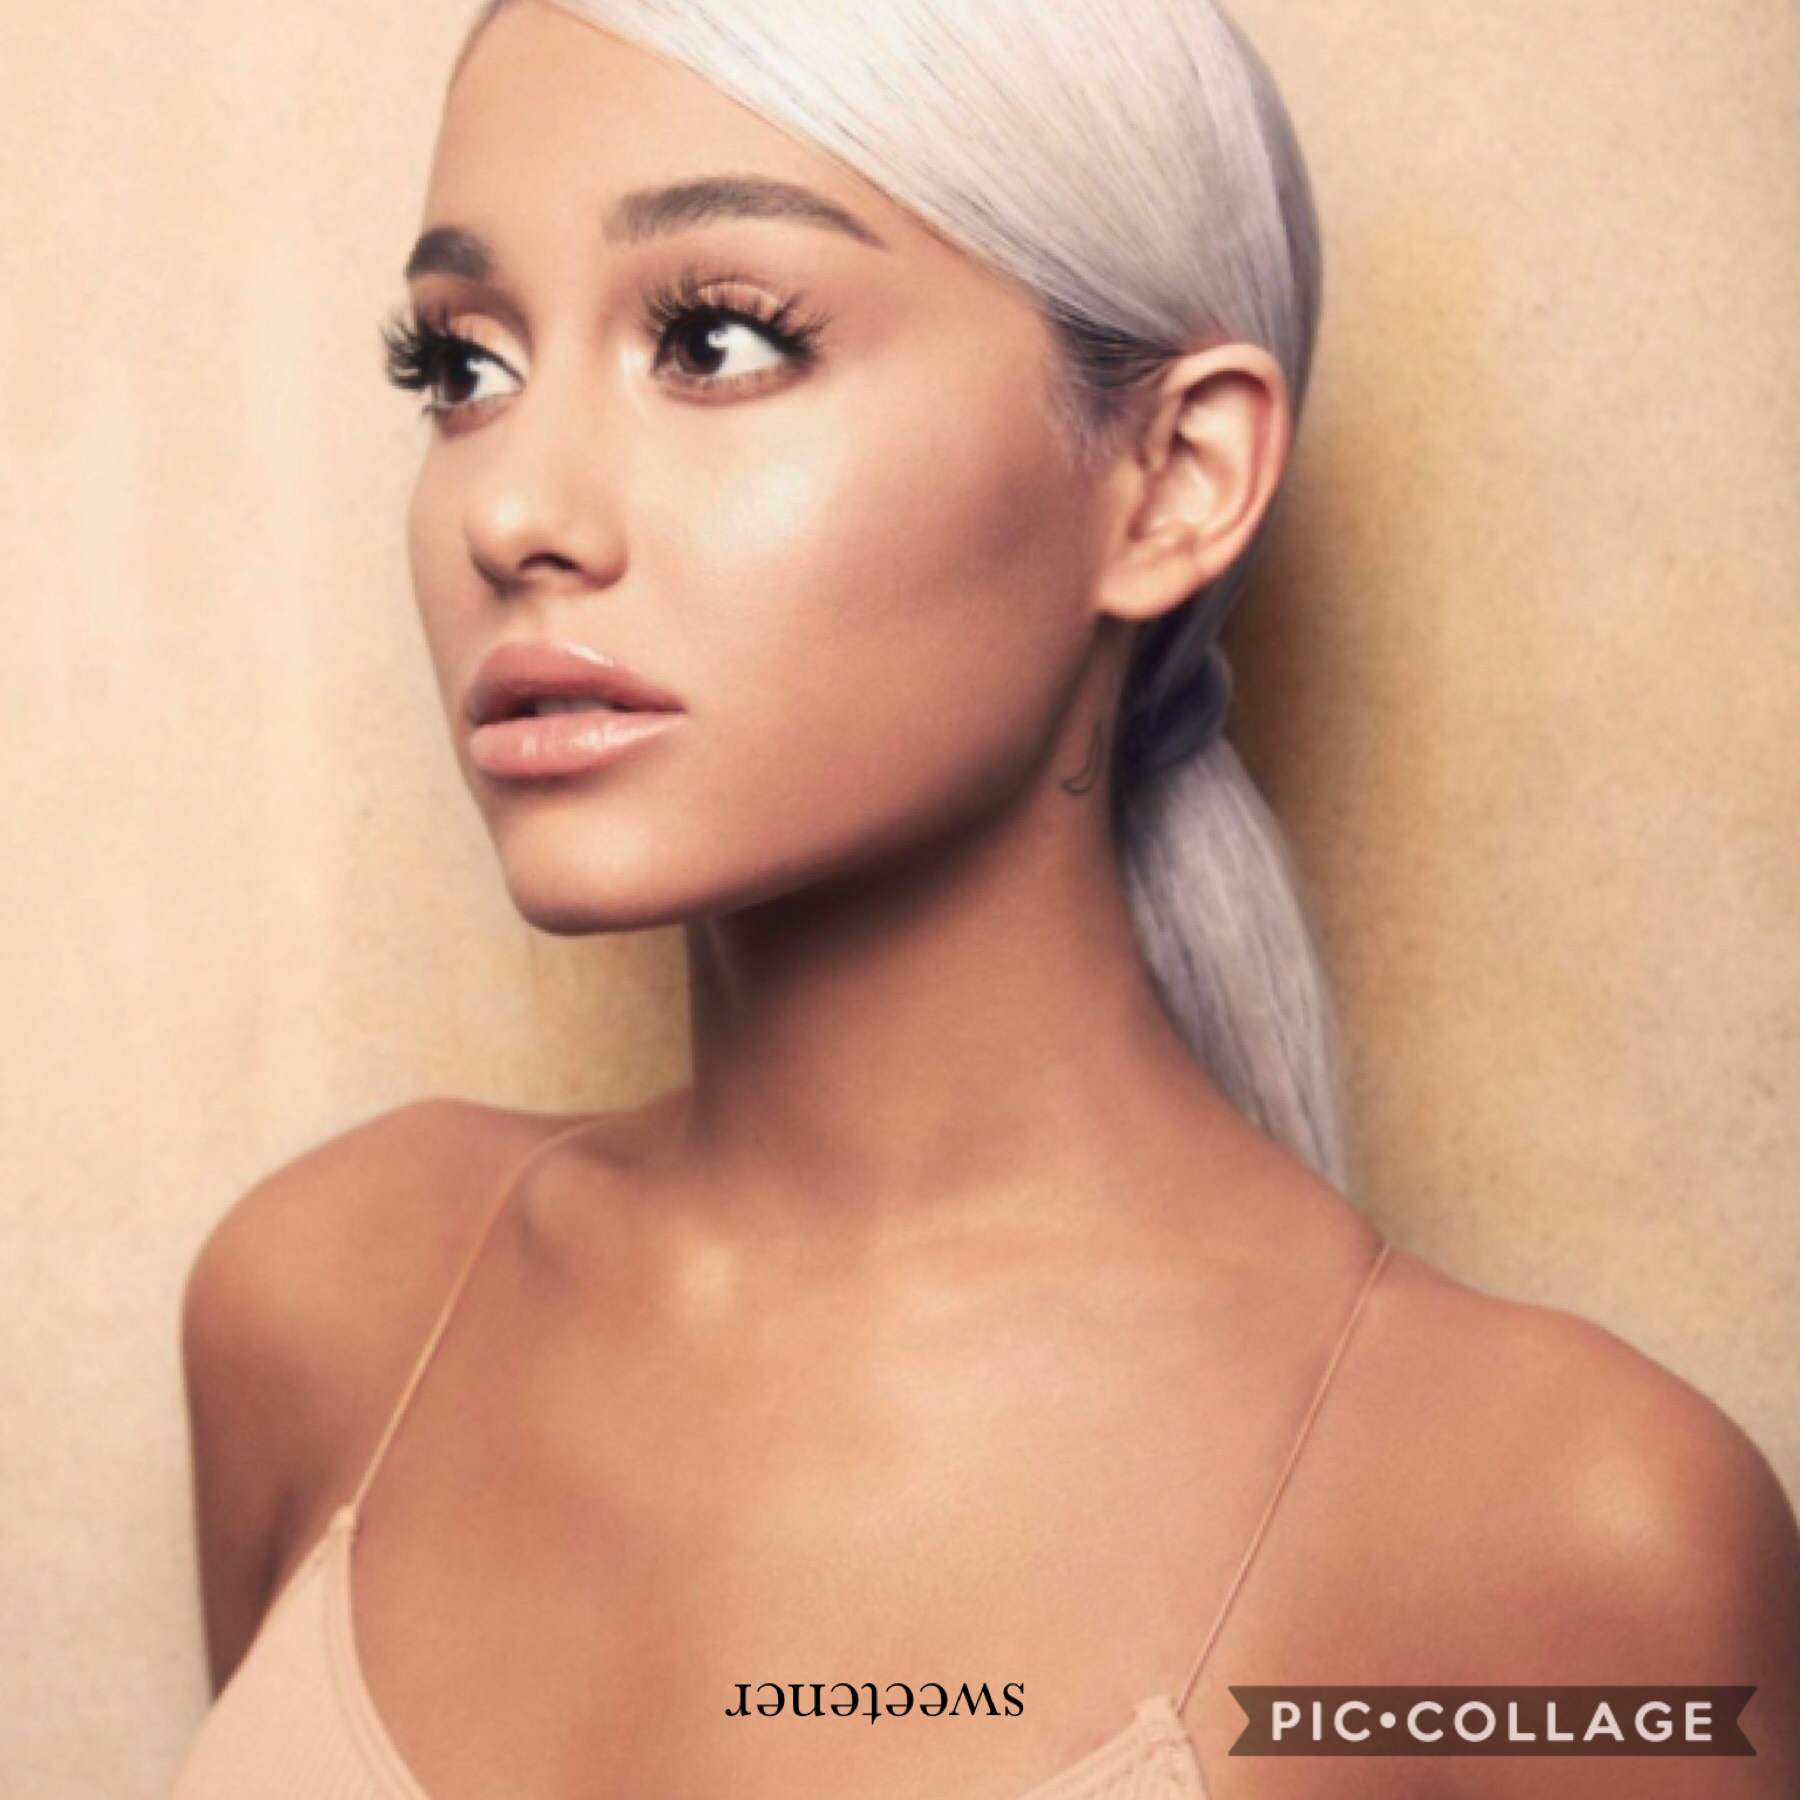 Sweetener. Midnight. Buy. Stream. Let’s go people!
Also I just wanna say I’m sooo proud of Ari, she’s worked sooo hard for this and I’m low key freakin out. I’ve tried breathin to control myself (pun intended).